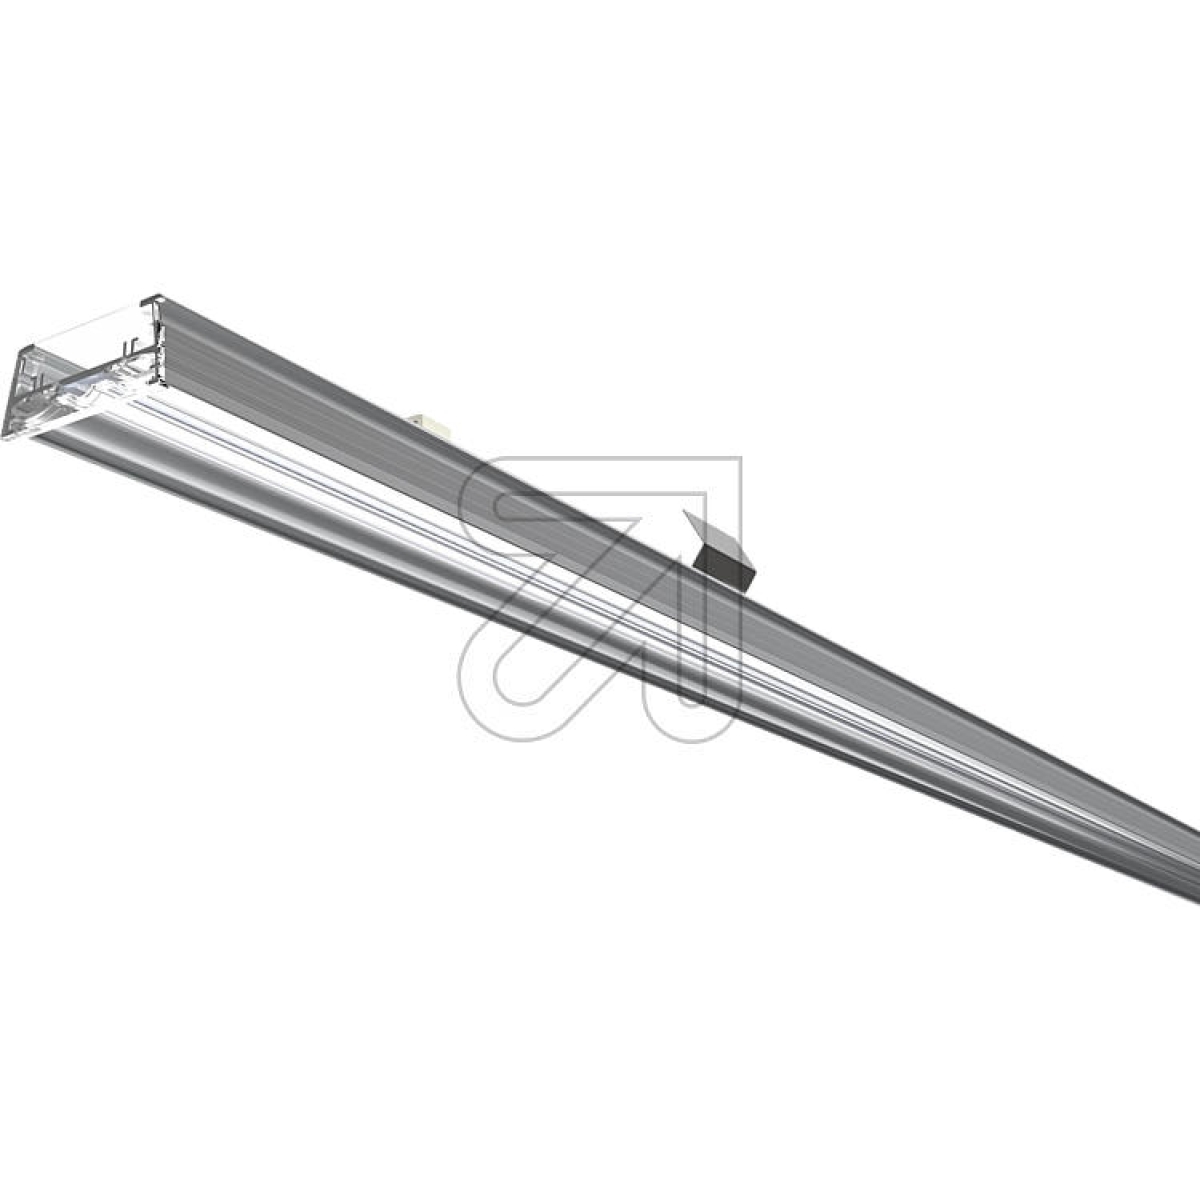 lichtlineLight line insert ClickLUX 2.0 EM-Z 5000-90, 5000K 56W, for central battery, beam angle 90°, 701550240097Article-No: 693635